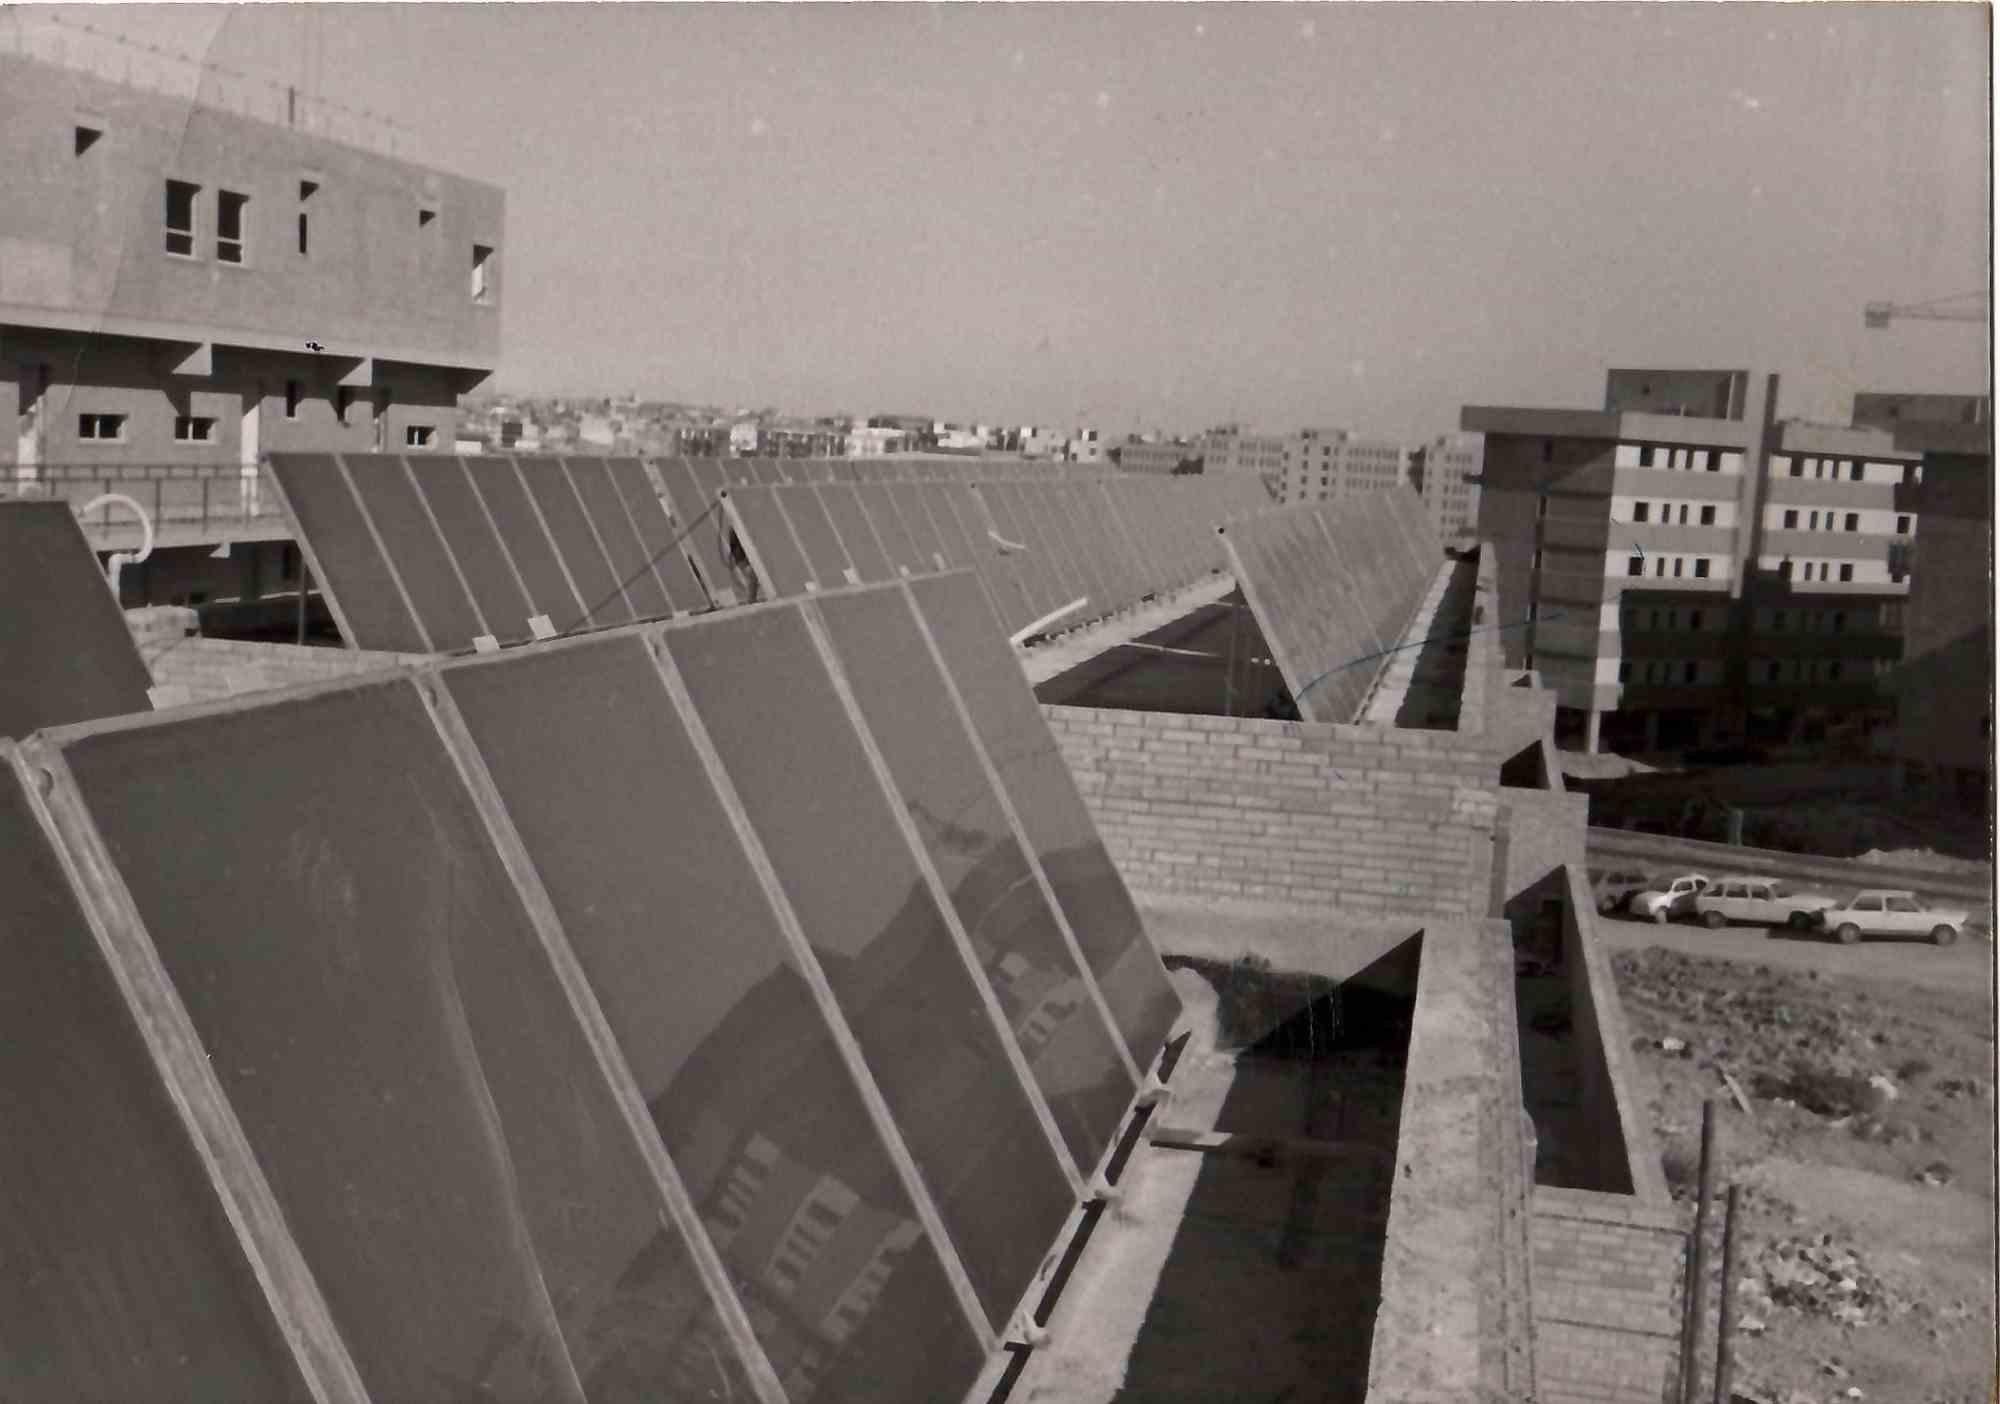 The First Solar Panels - Vintage Photograph - 1980s